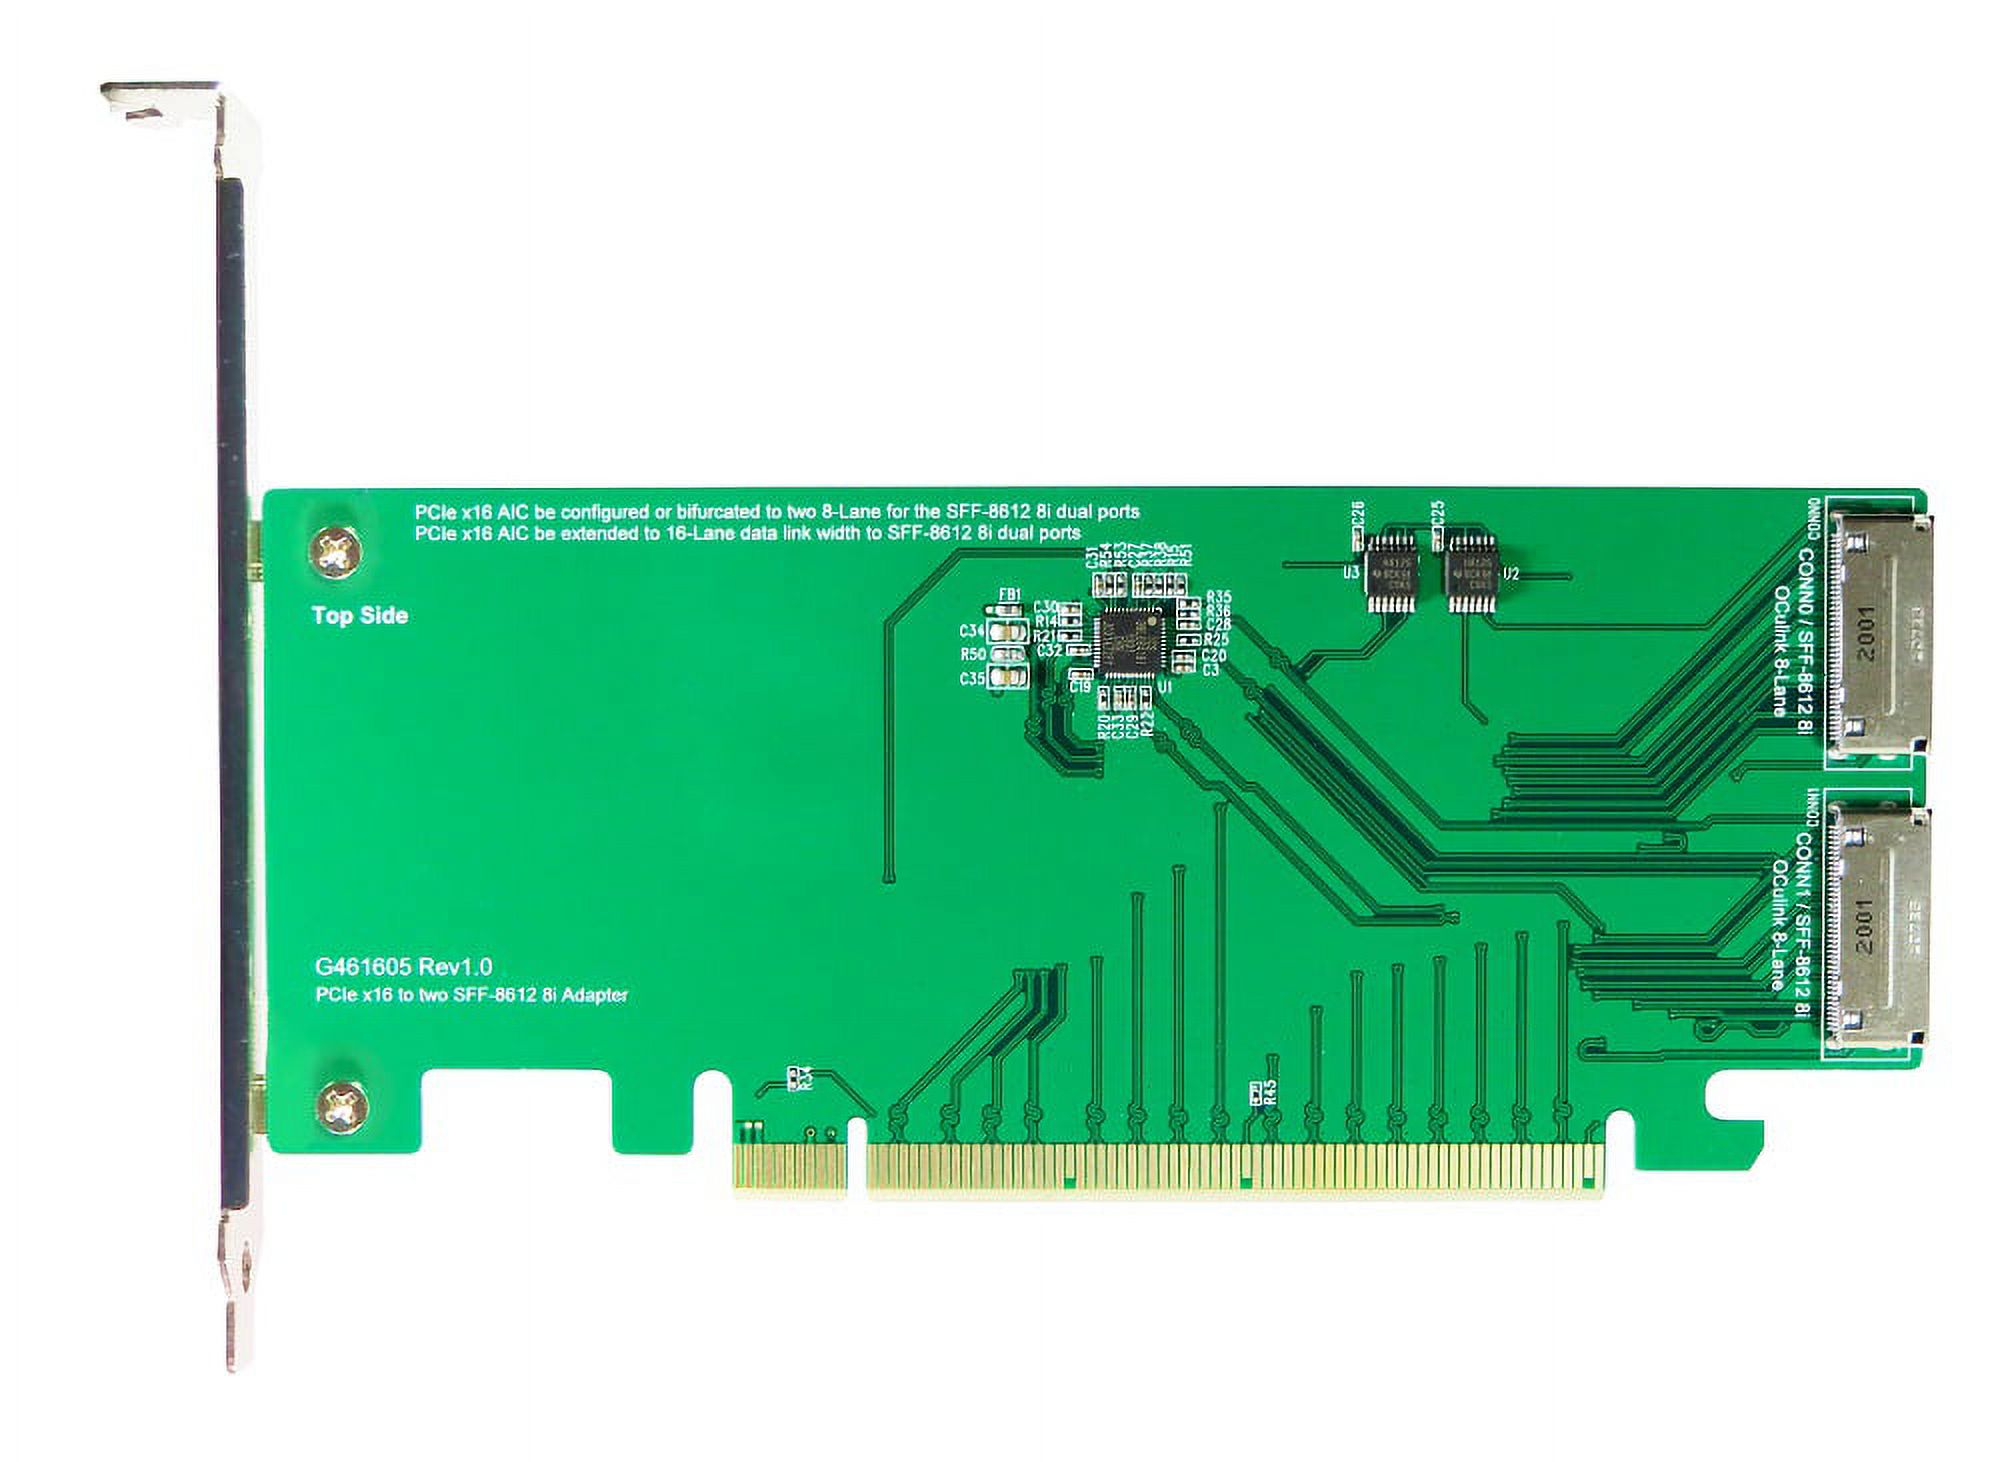 PCIe Gen 3 16X To Oculink 8-Lane SFF-8612 8i Dual Port Adapter - image 3 of 6